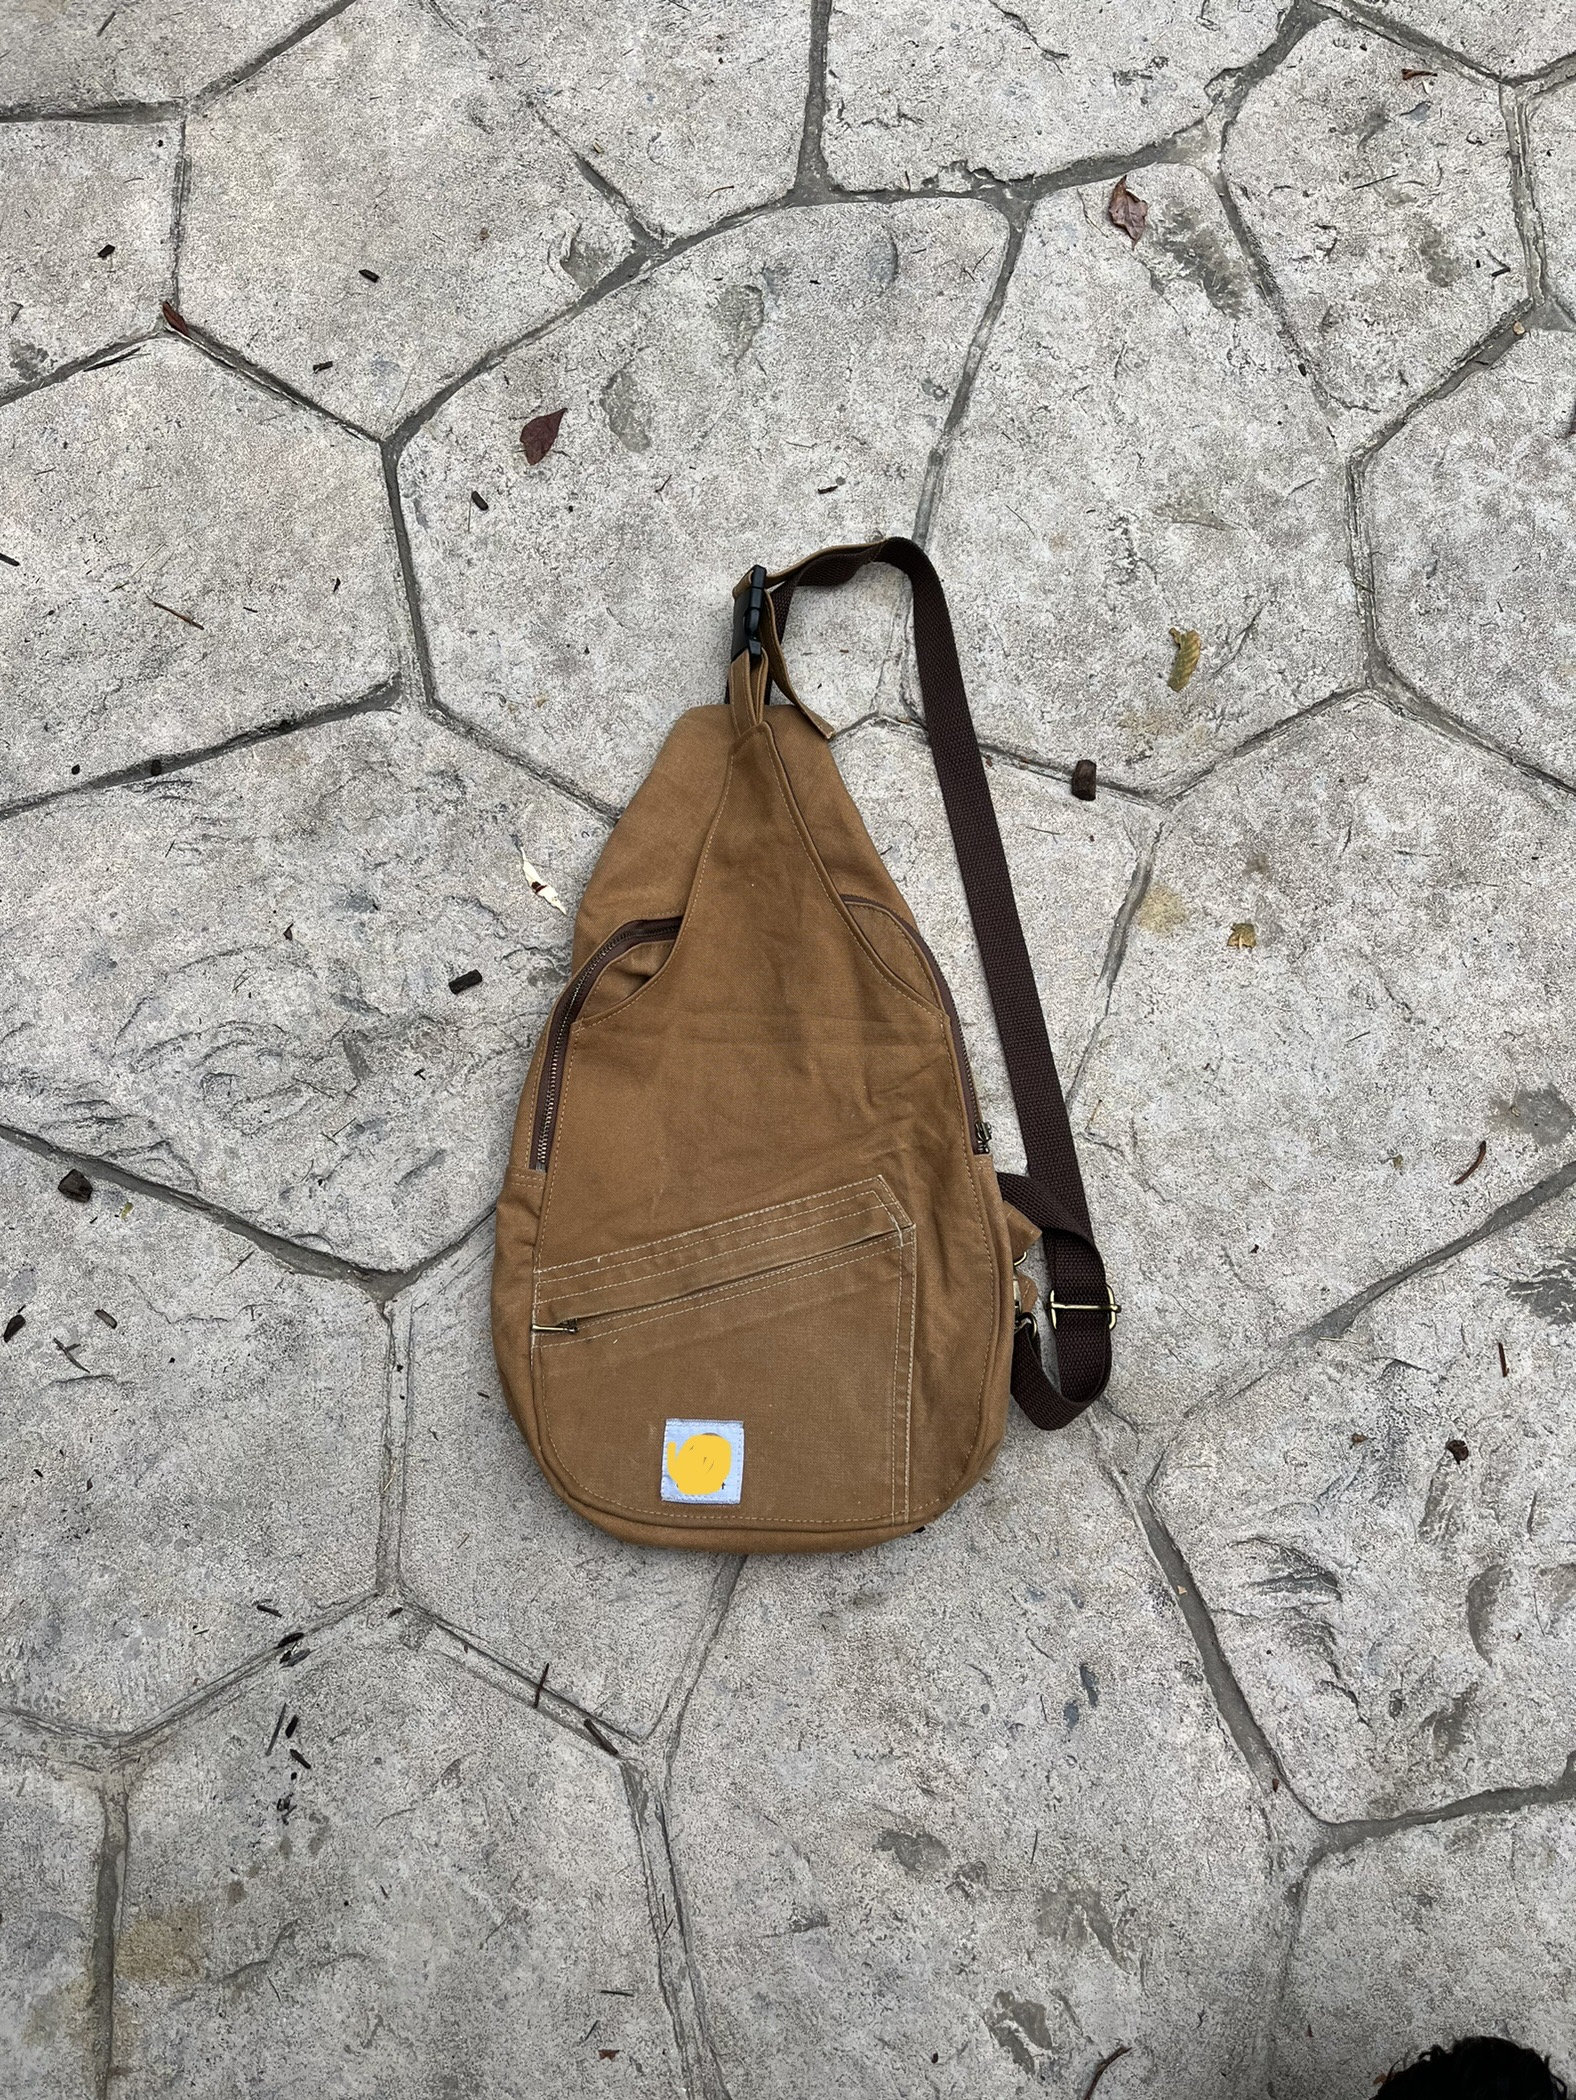 Up-cycled Sling Bag From Up-cycled Workwear Clothing. Canvas 